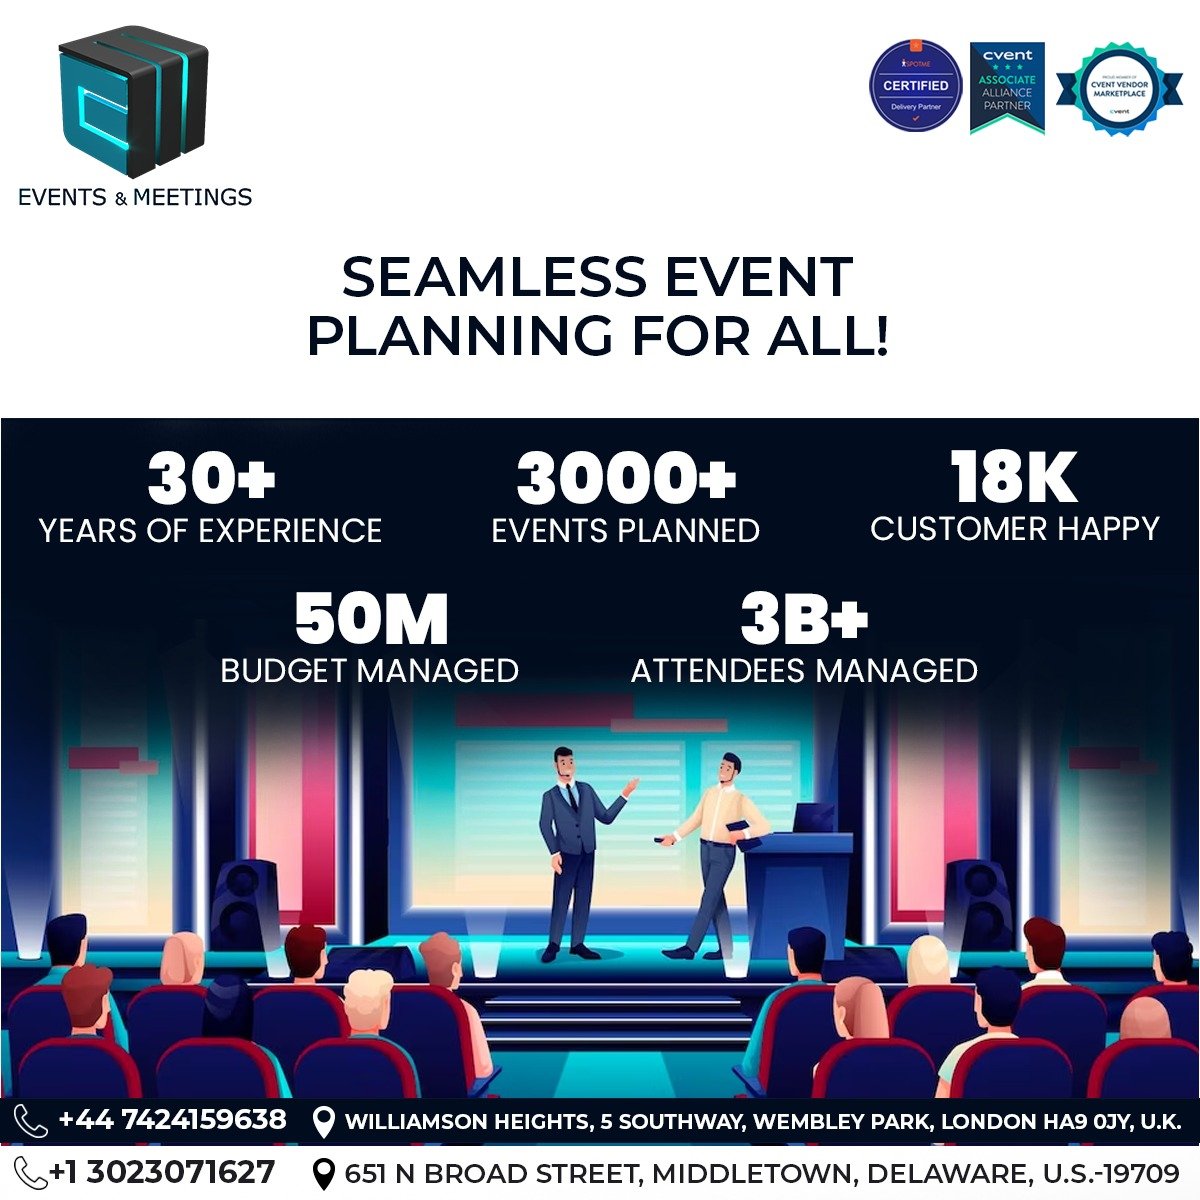 From inception to execution, our seasoned expertise ensures flawless event planning.

🌐 eventsandmeetings.co

#TechForEvents #EventExcellence #EventInnovation #EventsAndTech #EventTechSolutions #FutureOfEvents #cvent #spotme #eventtechsolutions #eventsandmeetings